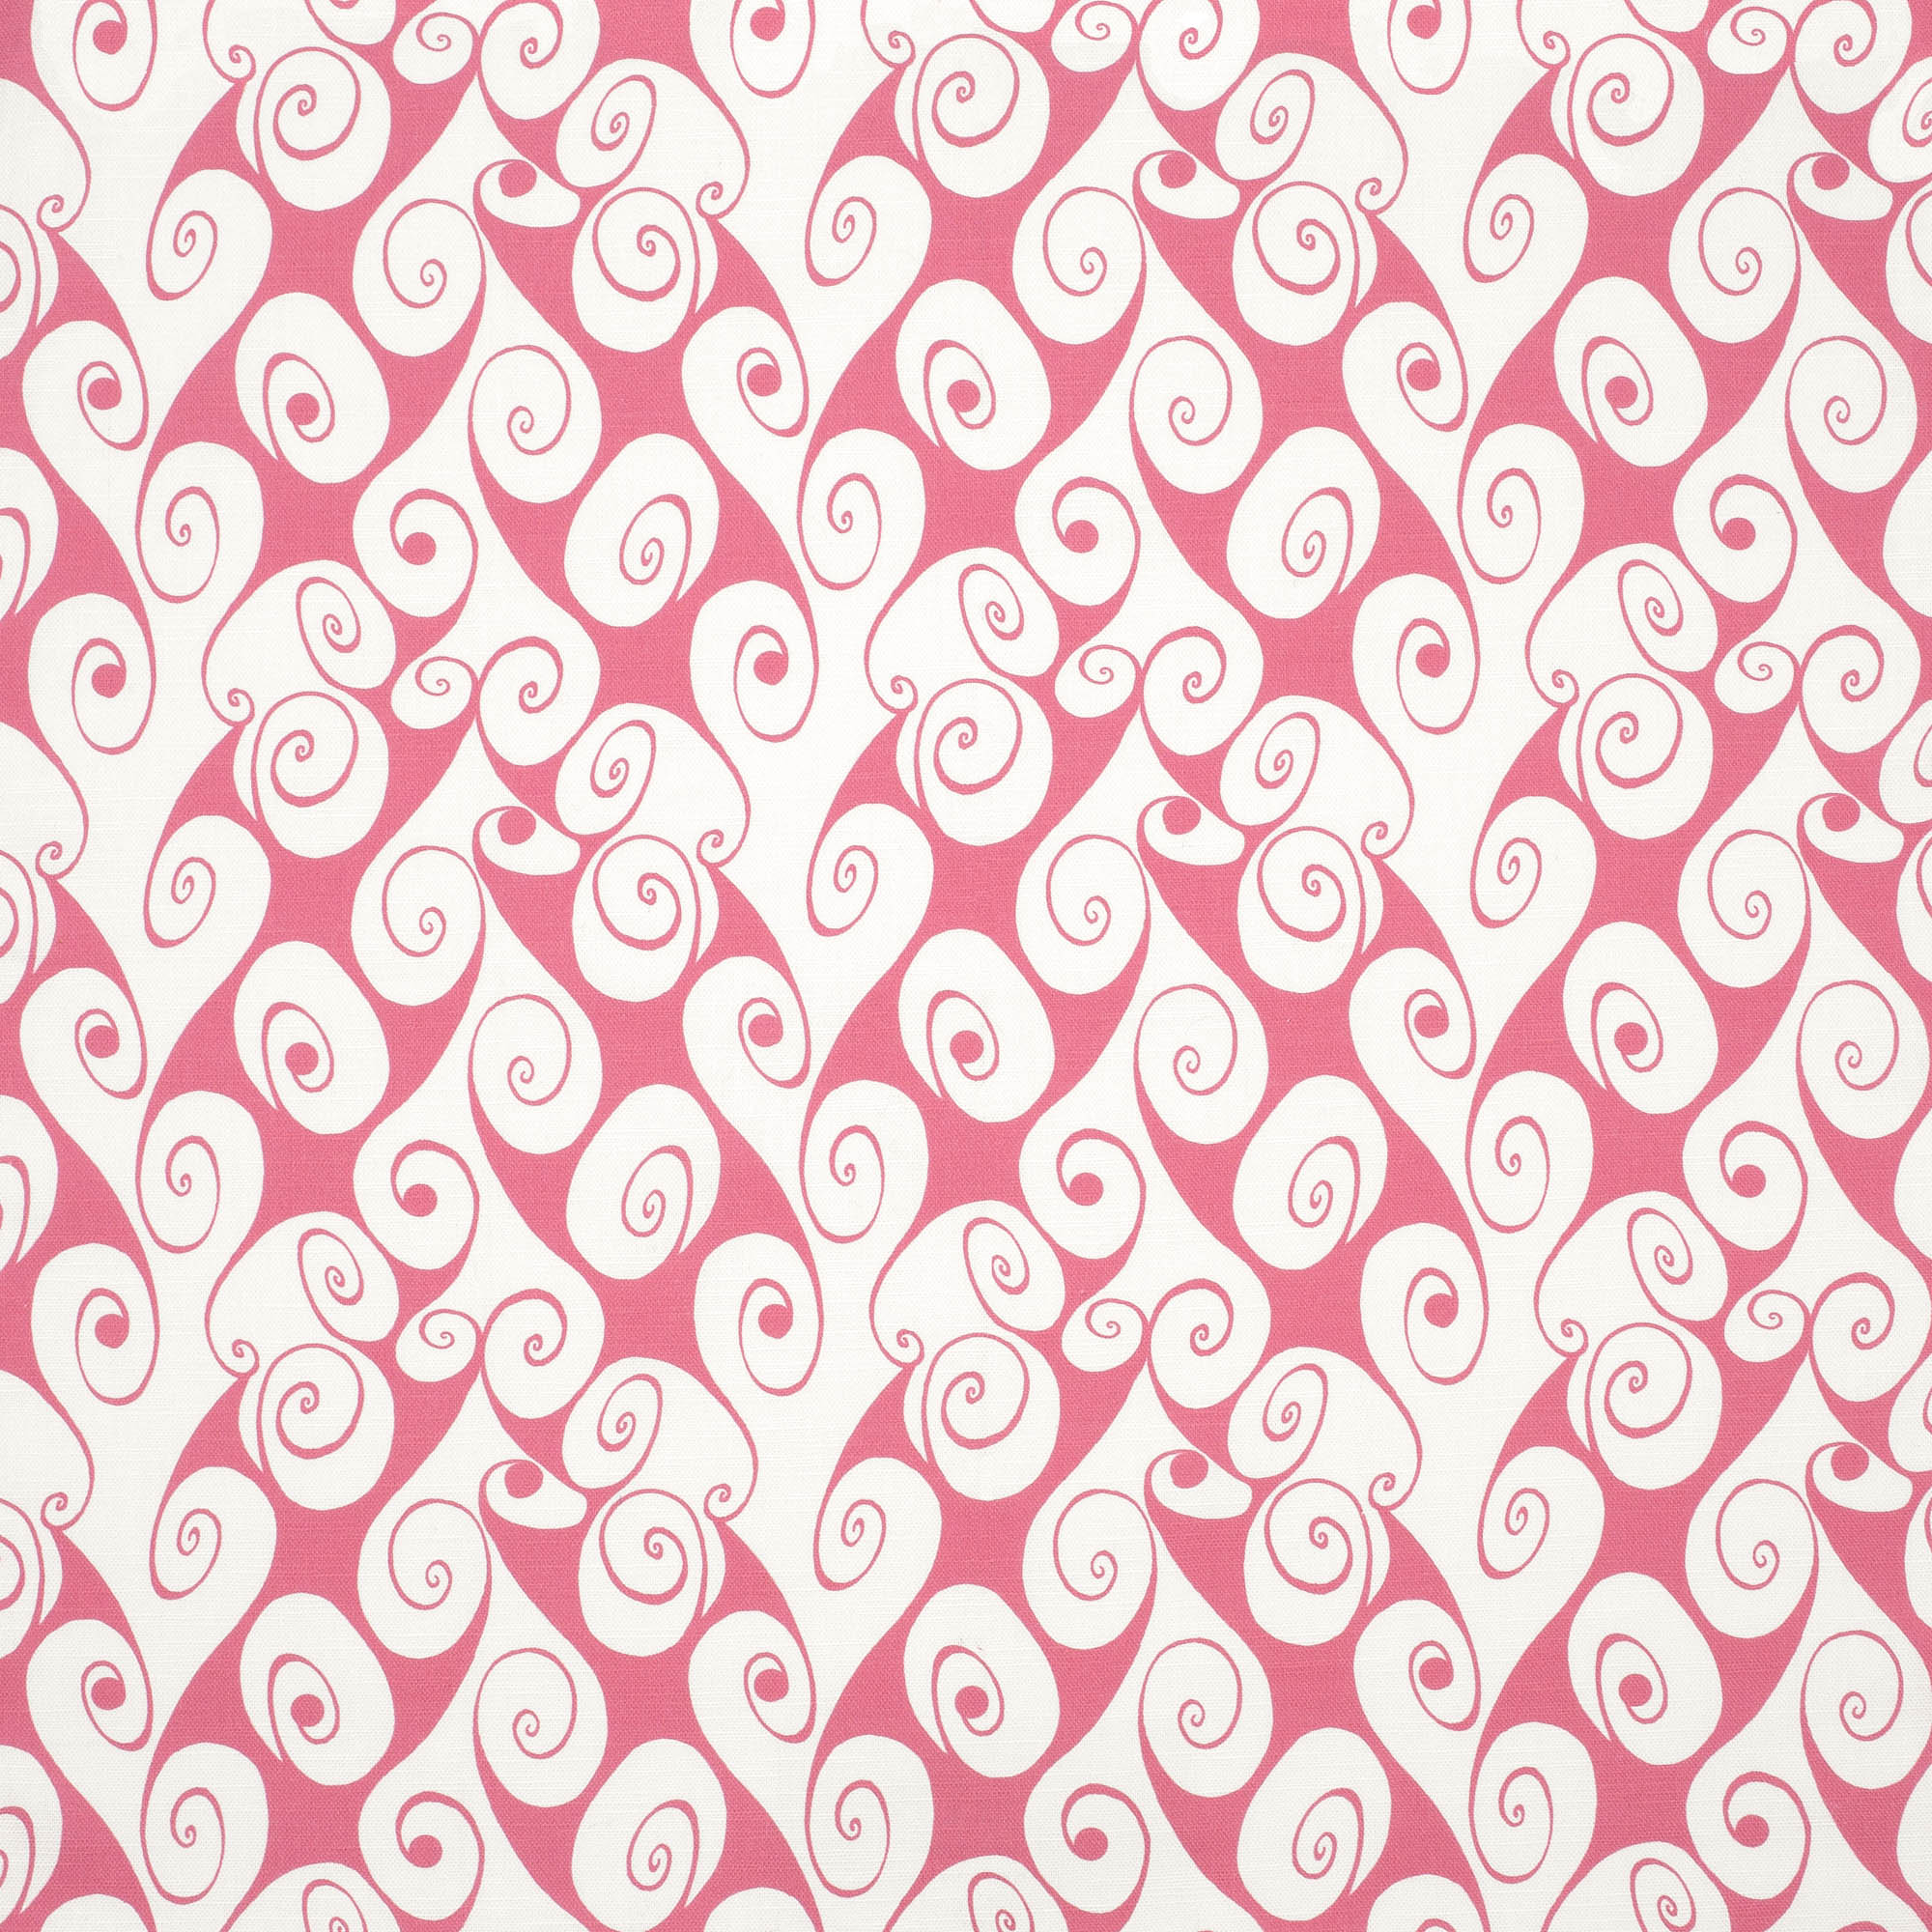 Detail of fabric in a playful abstract shape print in white on a pink field.